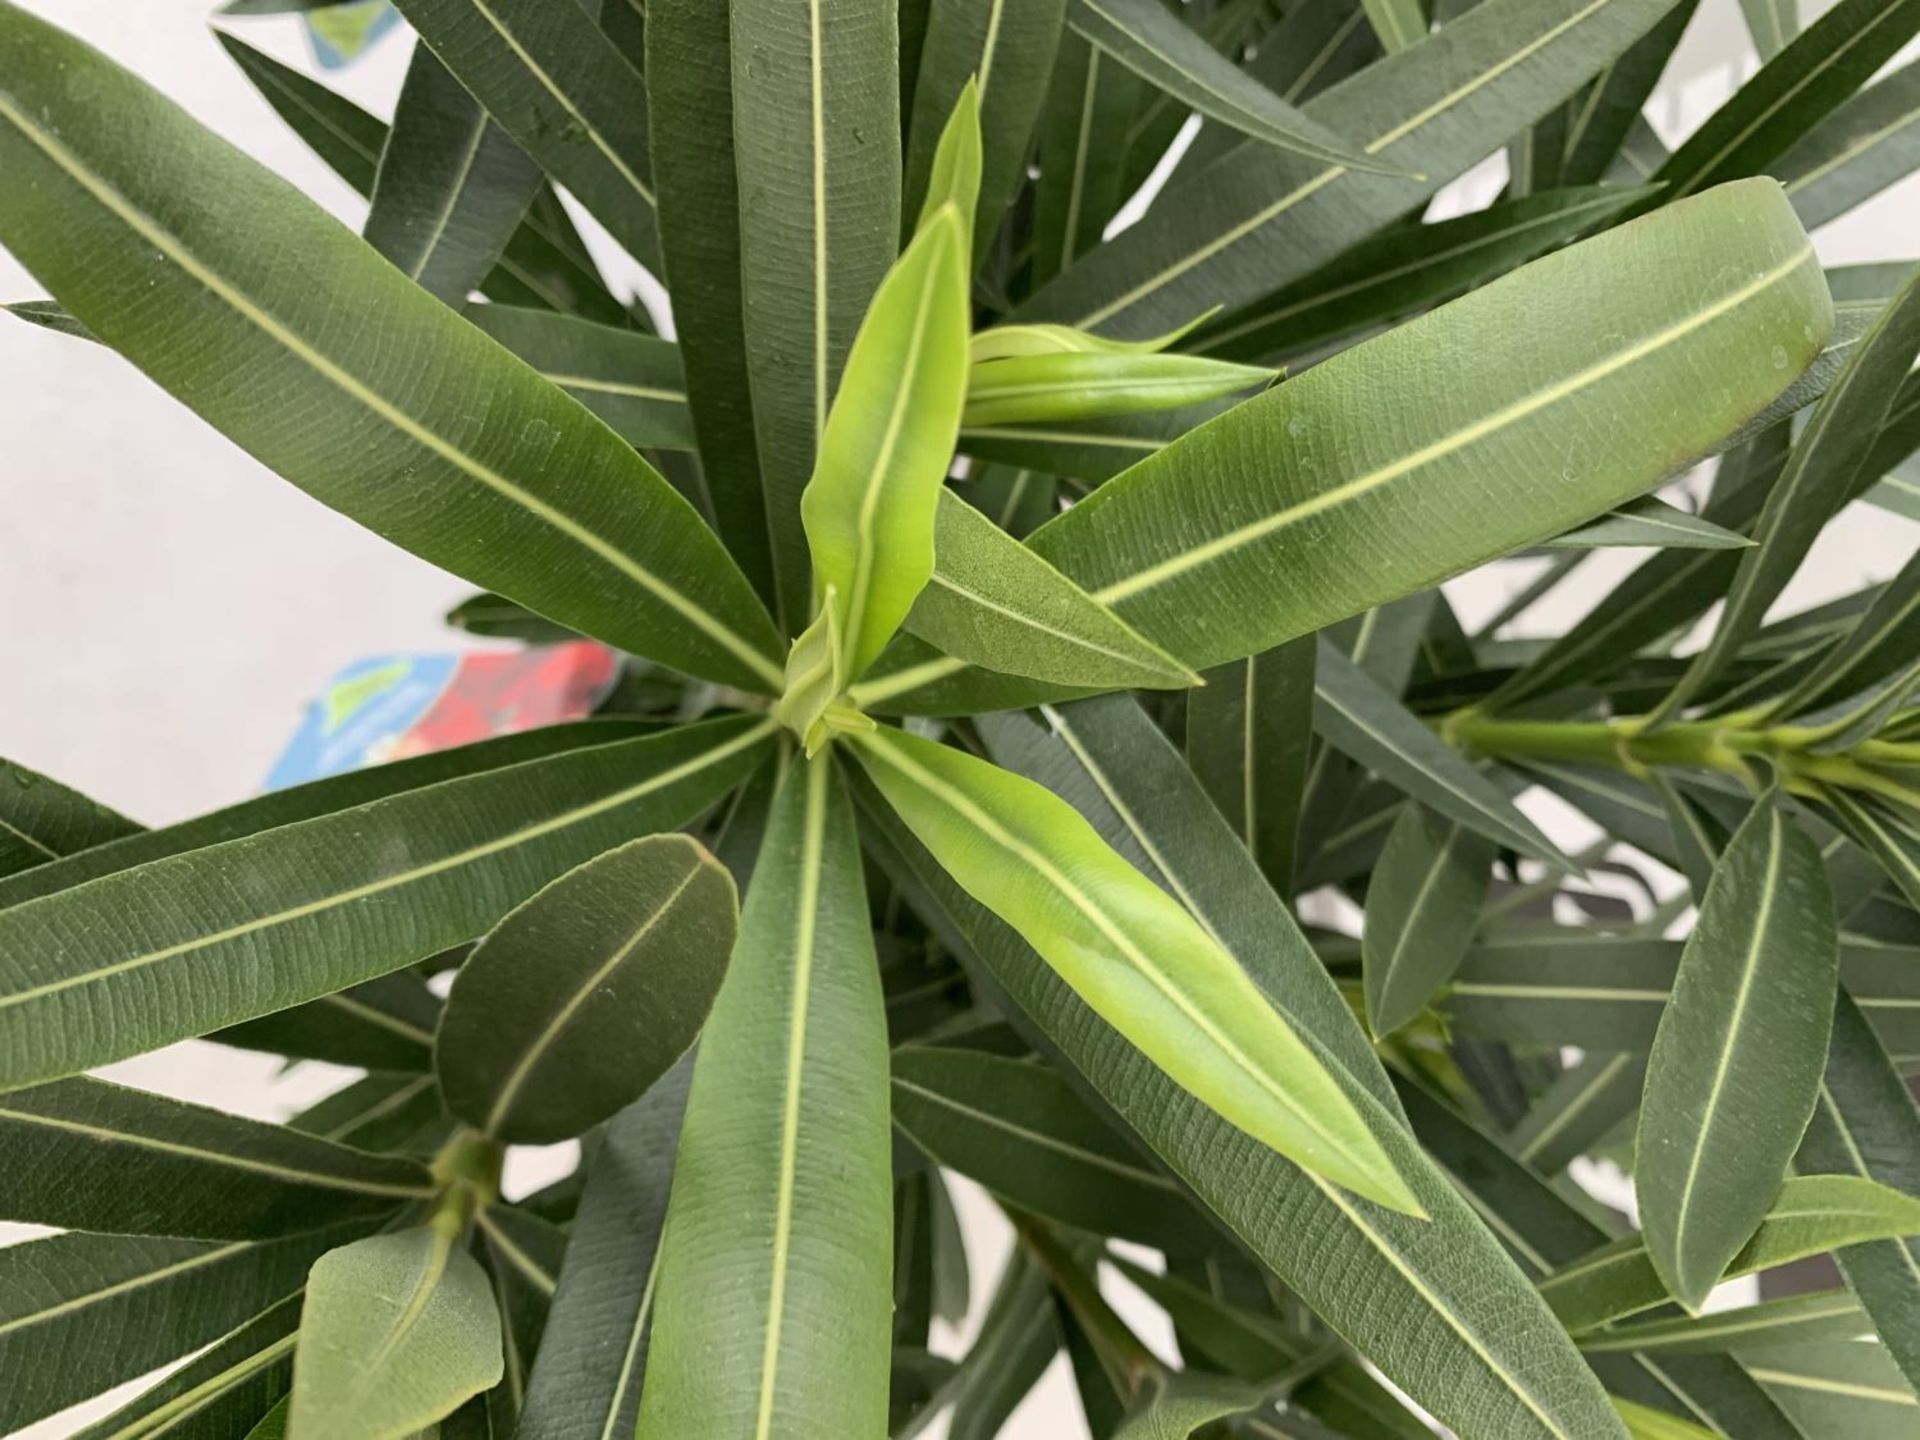 TWO OLEANDER NERIUM SHRUBS MULTICOLOURED APPROX 60CM TALL IN 4 LTR POTS PLUS VAT TO BE SOLD FOR - Image 6 of 10